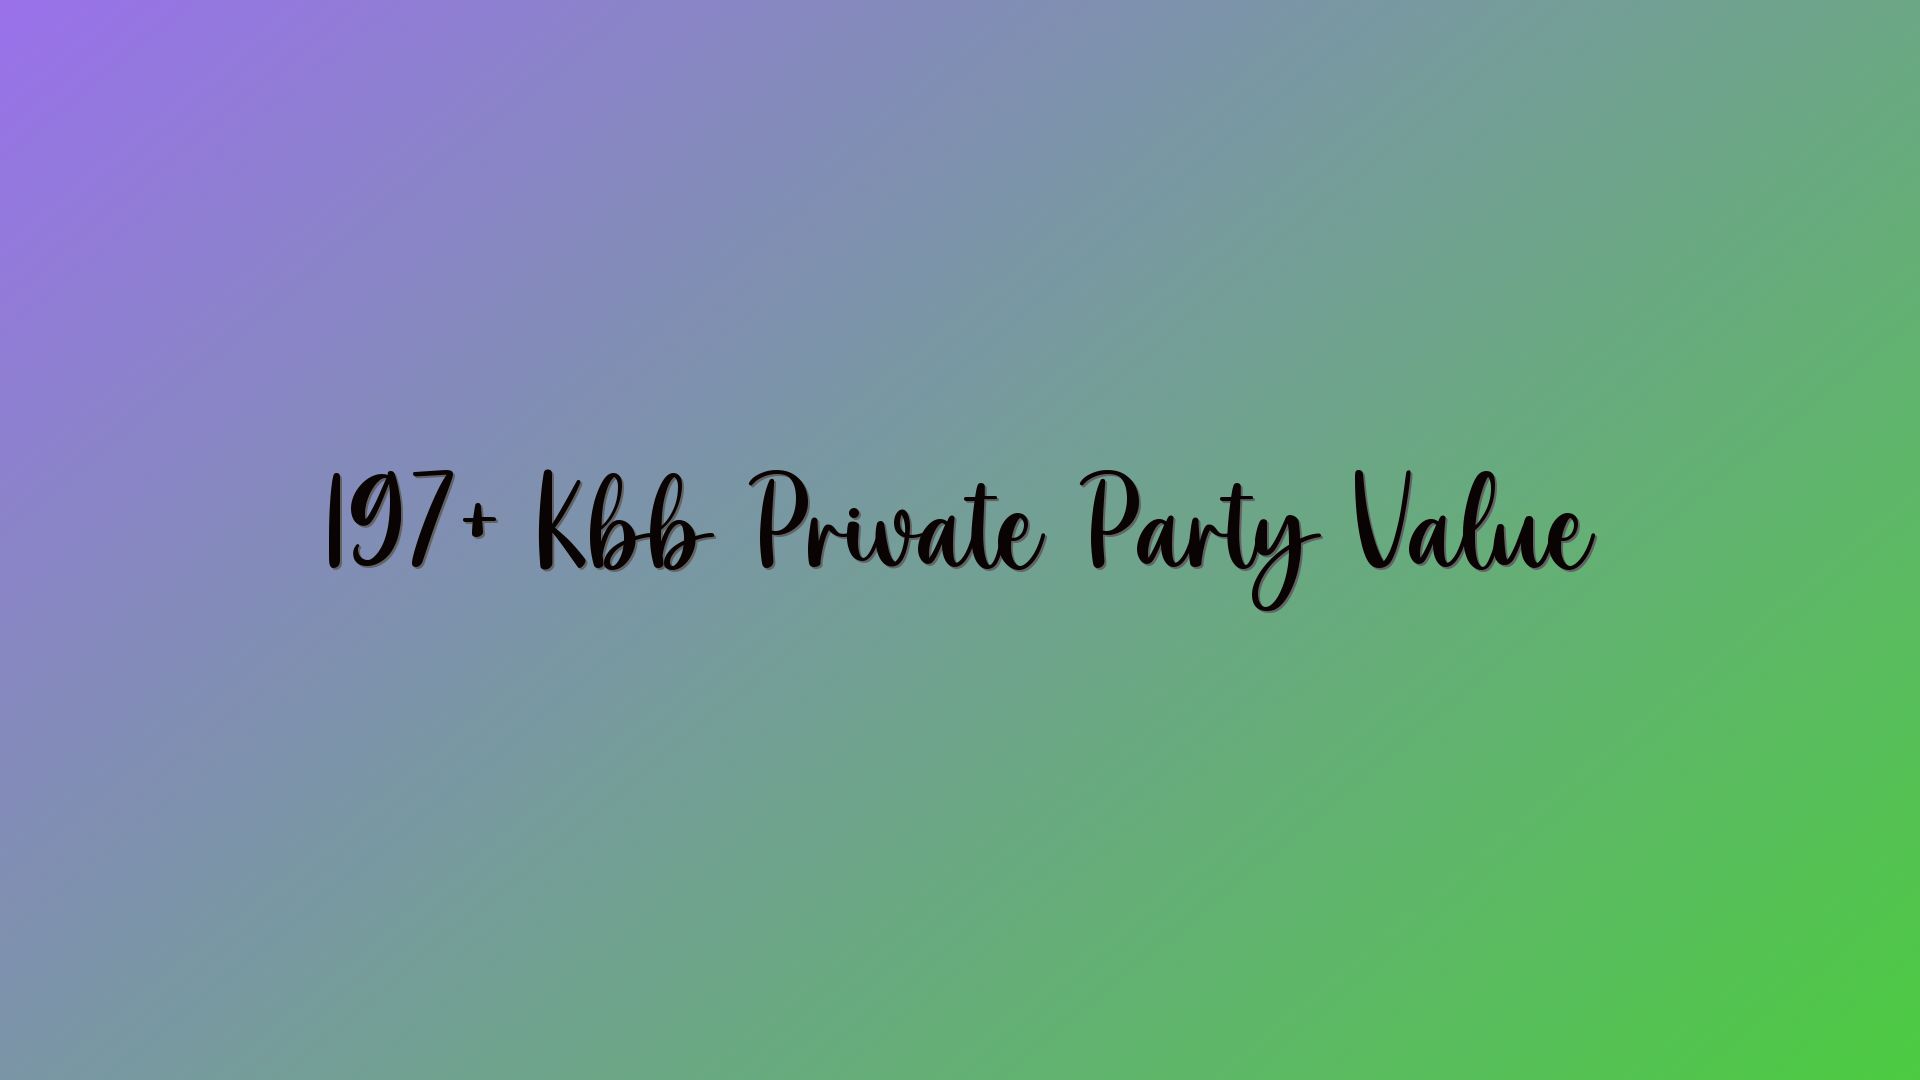 197+ Kbb Private Party Value